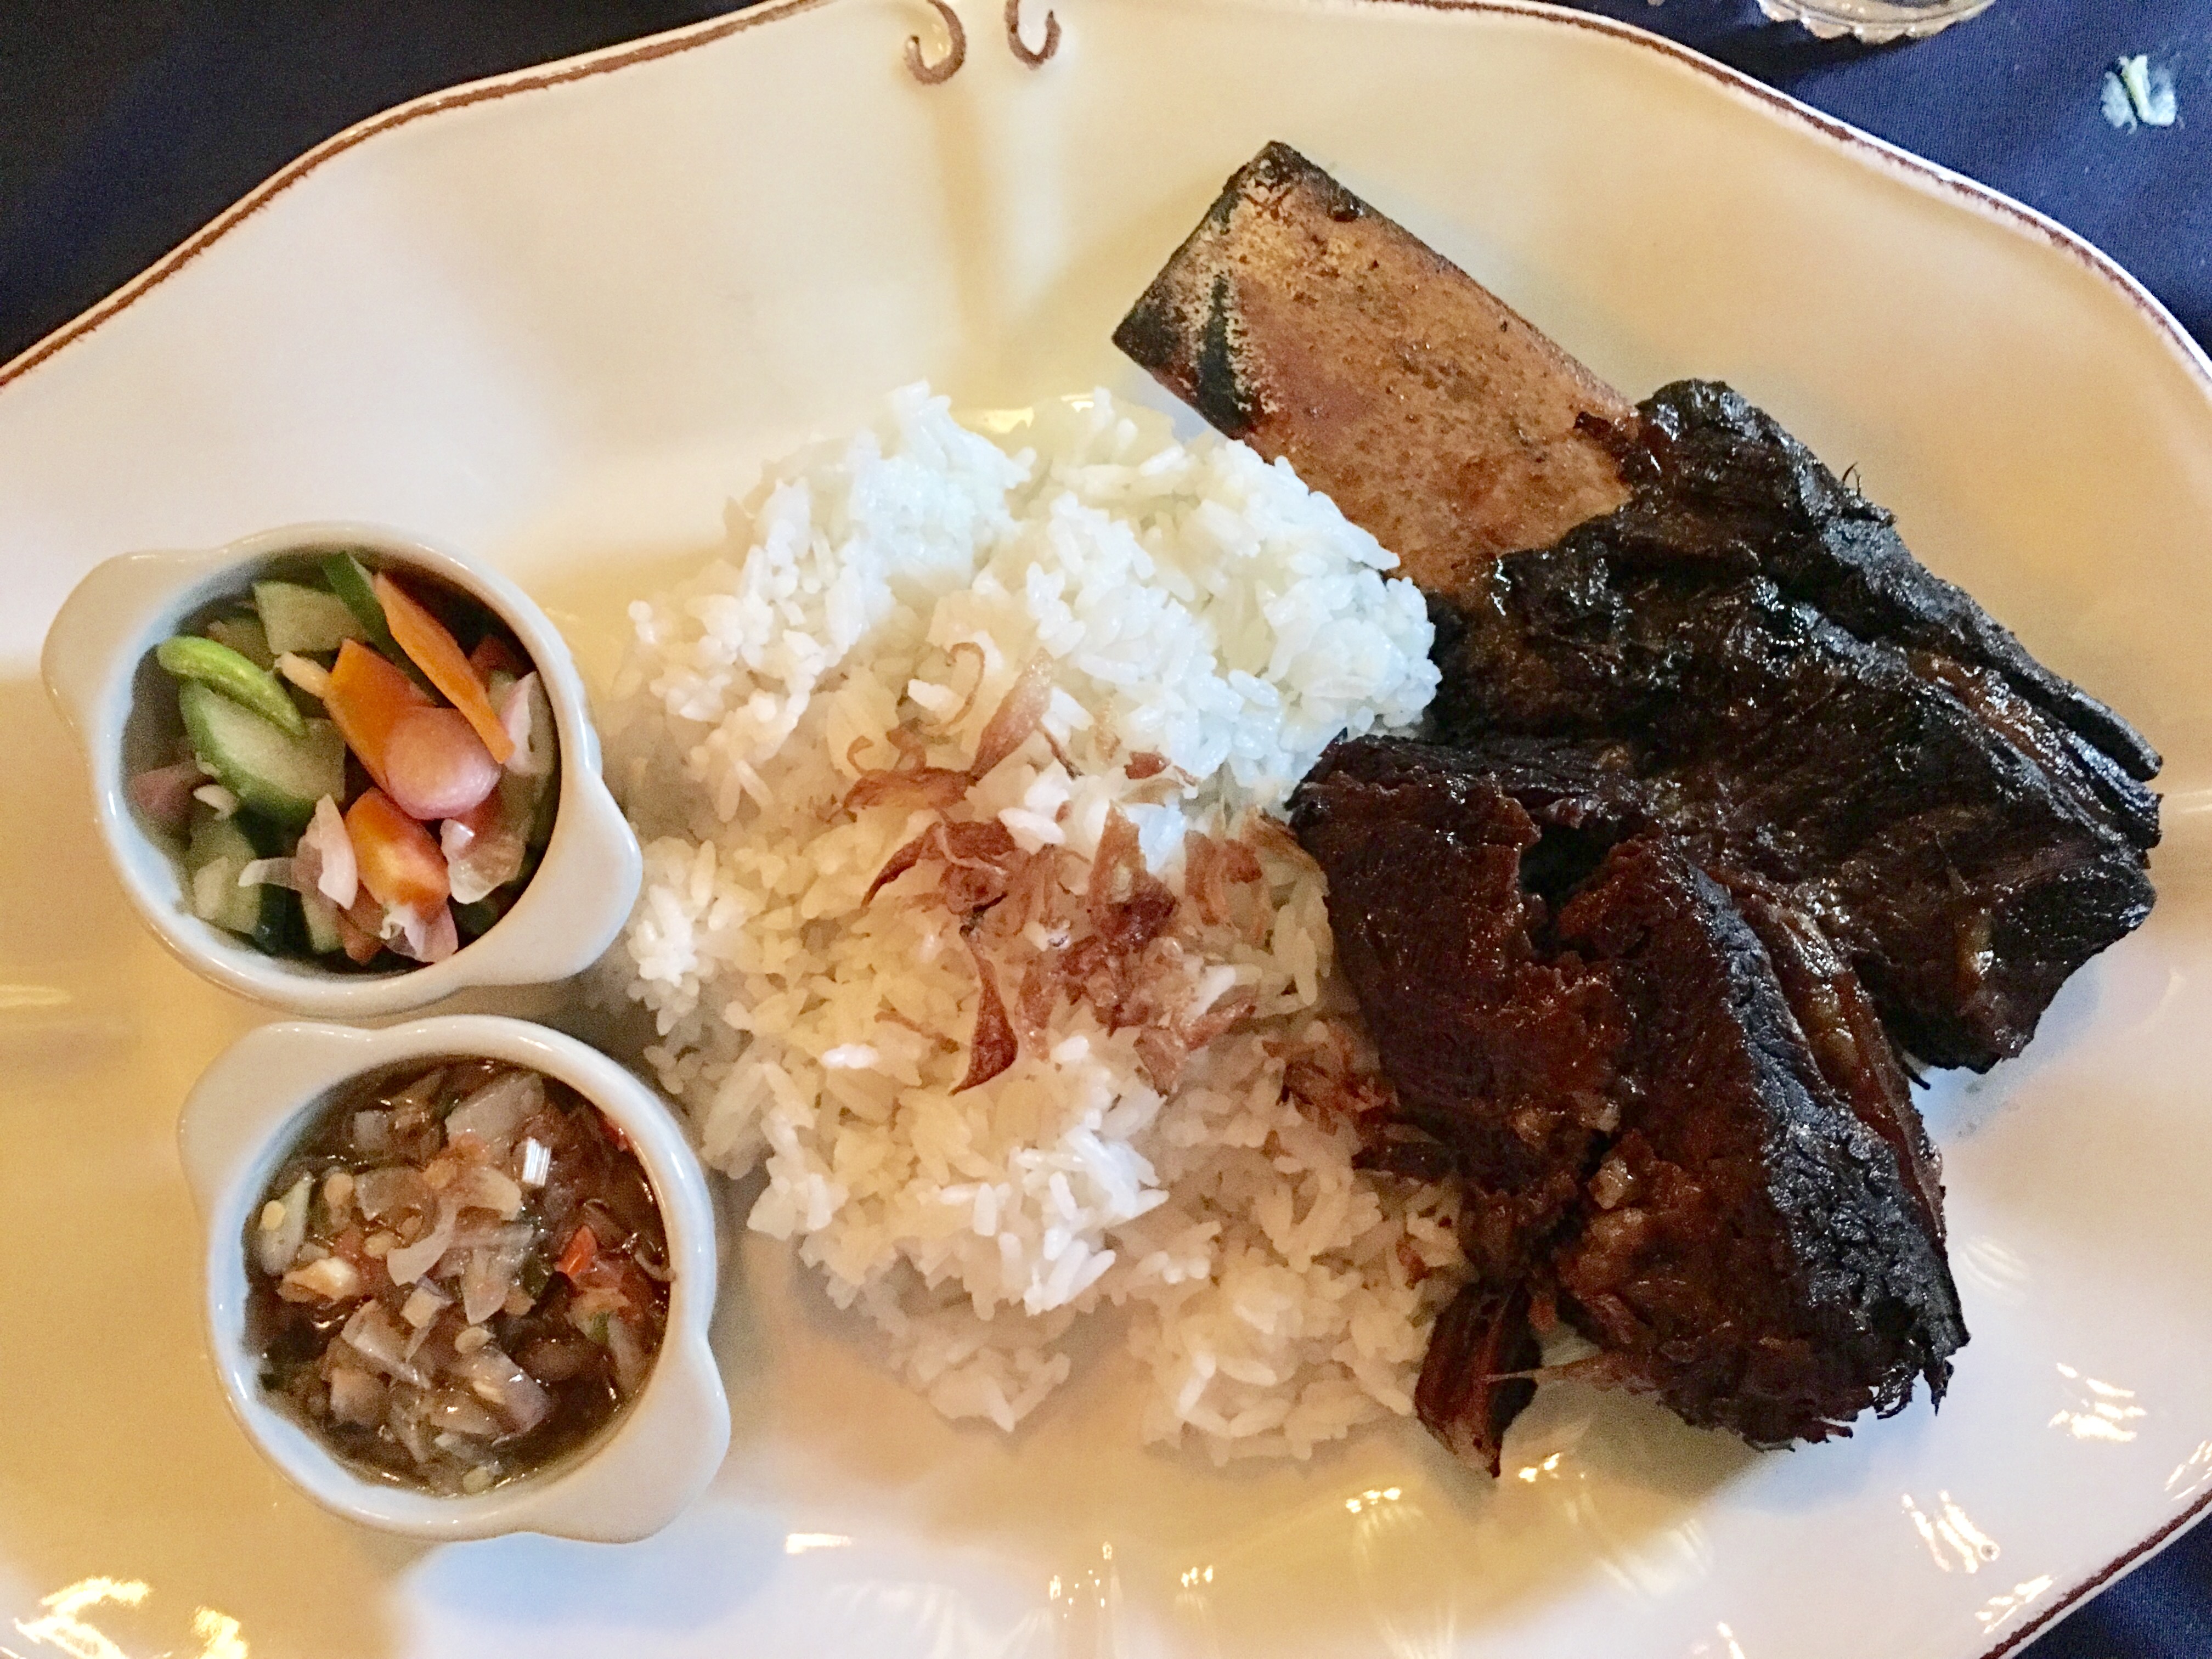 Ika bagar: eight-hour braised beef ribs with a side of rice and sambal mash.